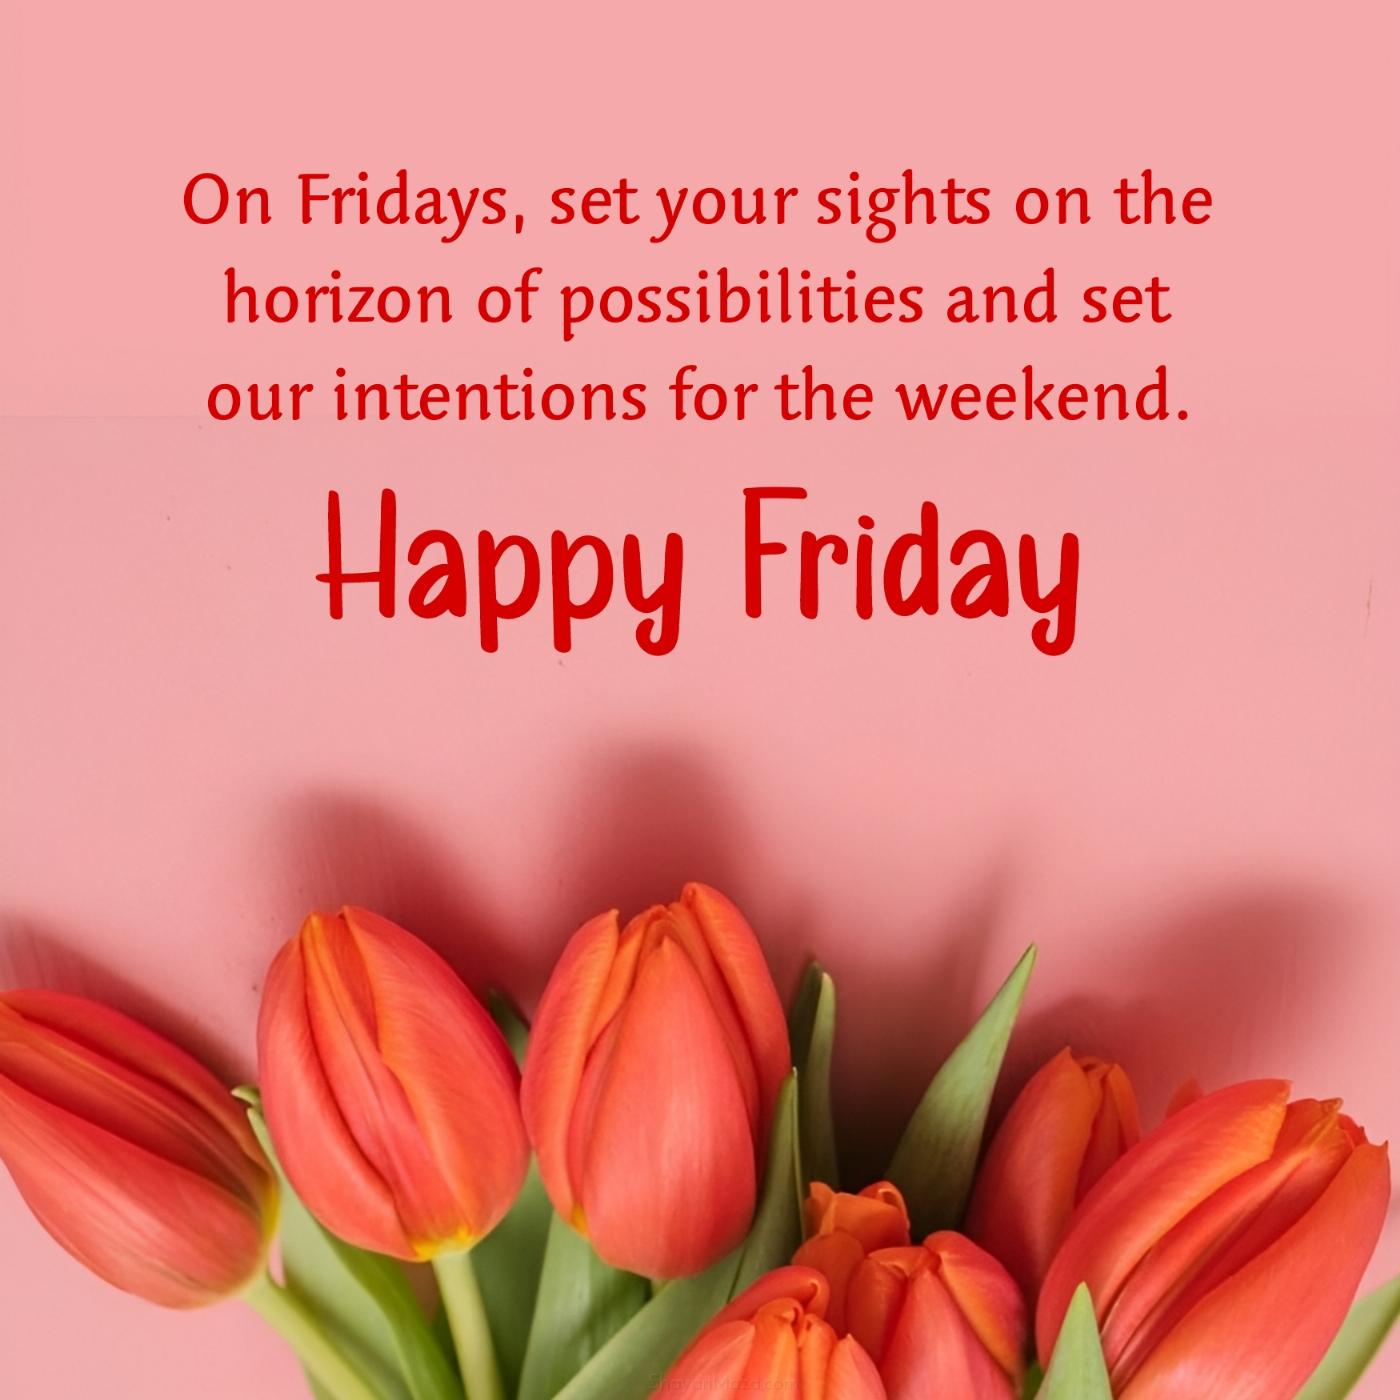 On Fridays set your sights on the horizon of possibilities